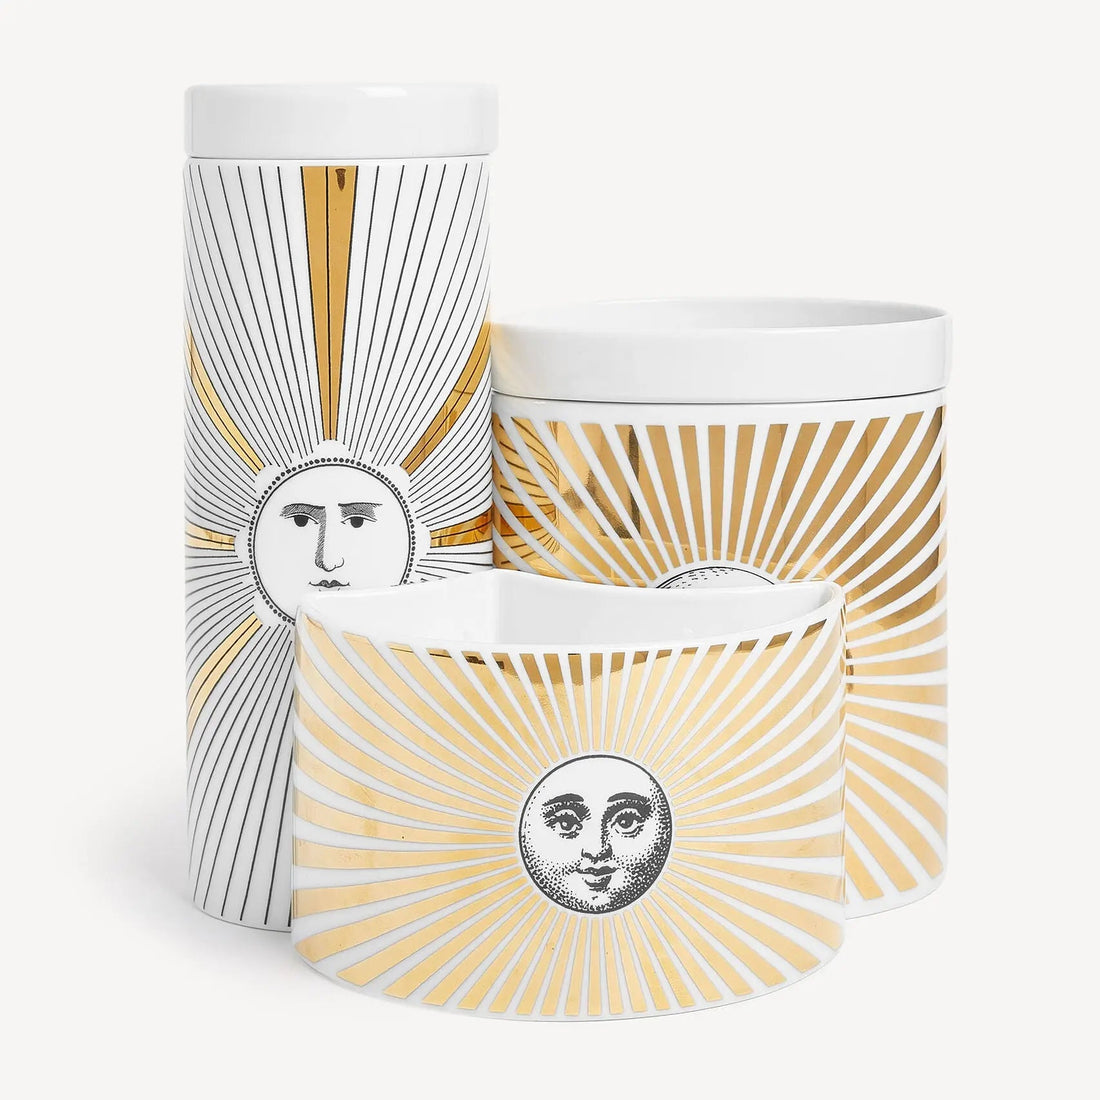 MEANWHILE Set of Soli Fornasetti Candles 2.4Kg